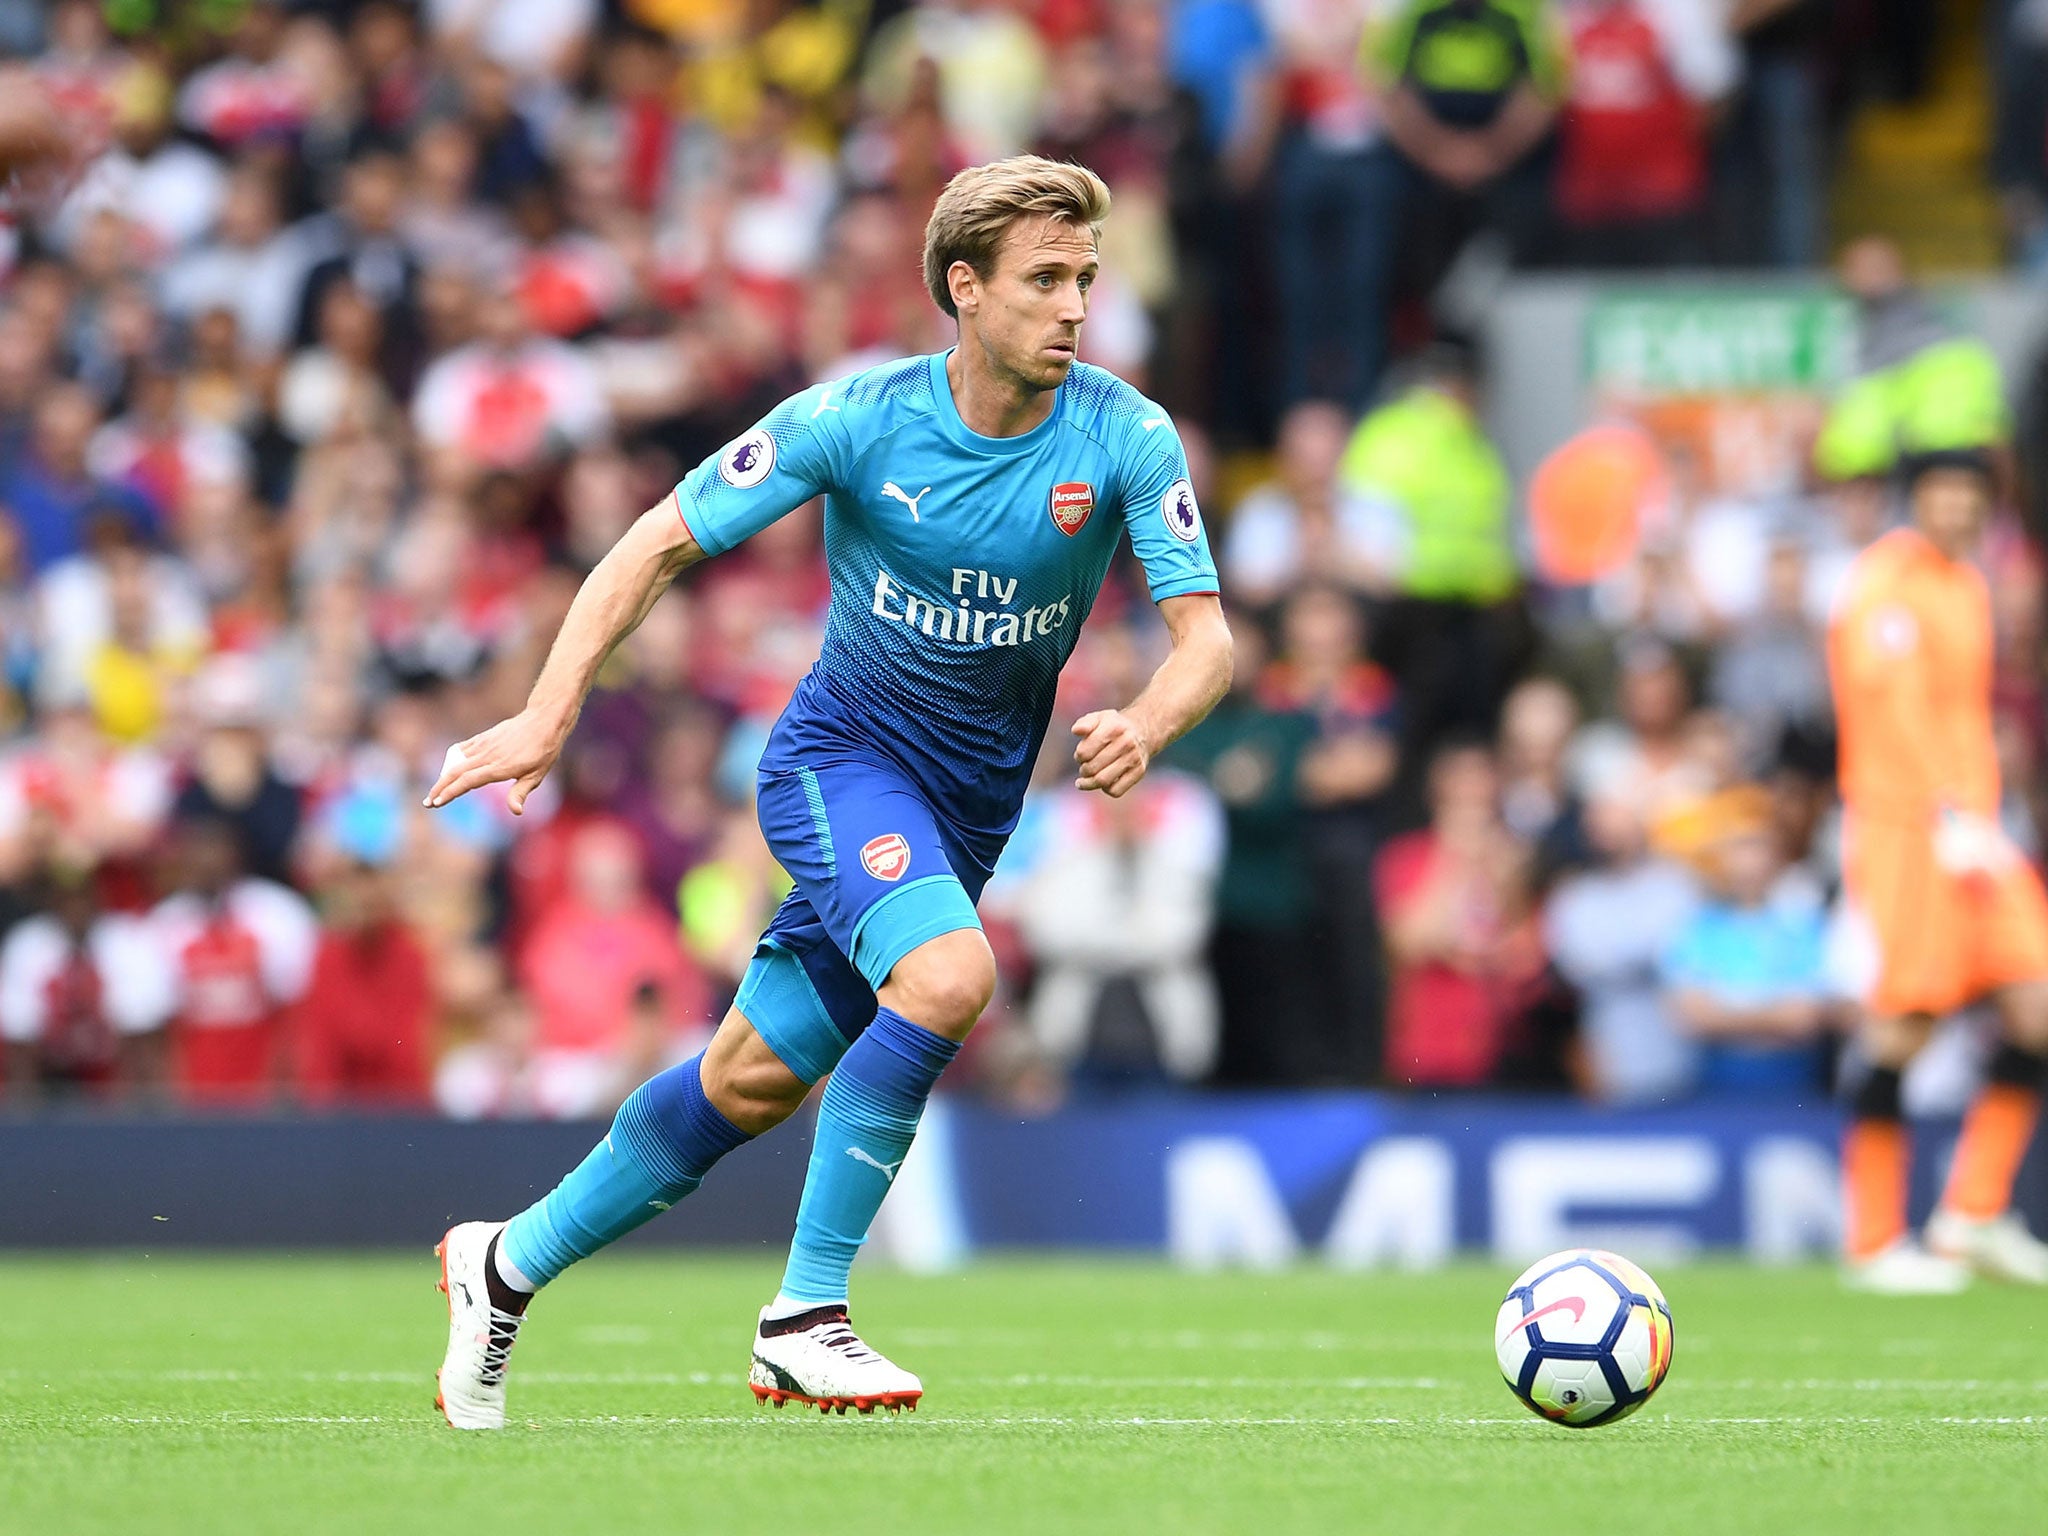 Nacho Monreal in action during Liverpool's 4-0 defeat by Liverpool